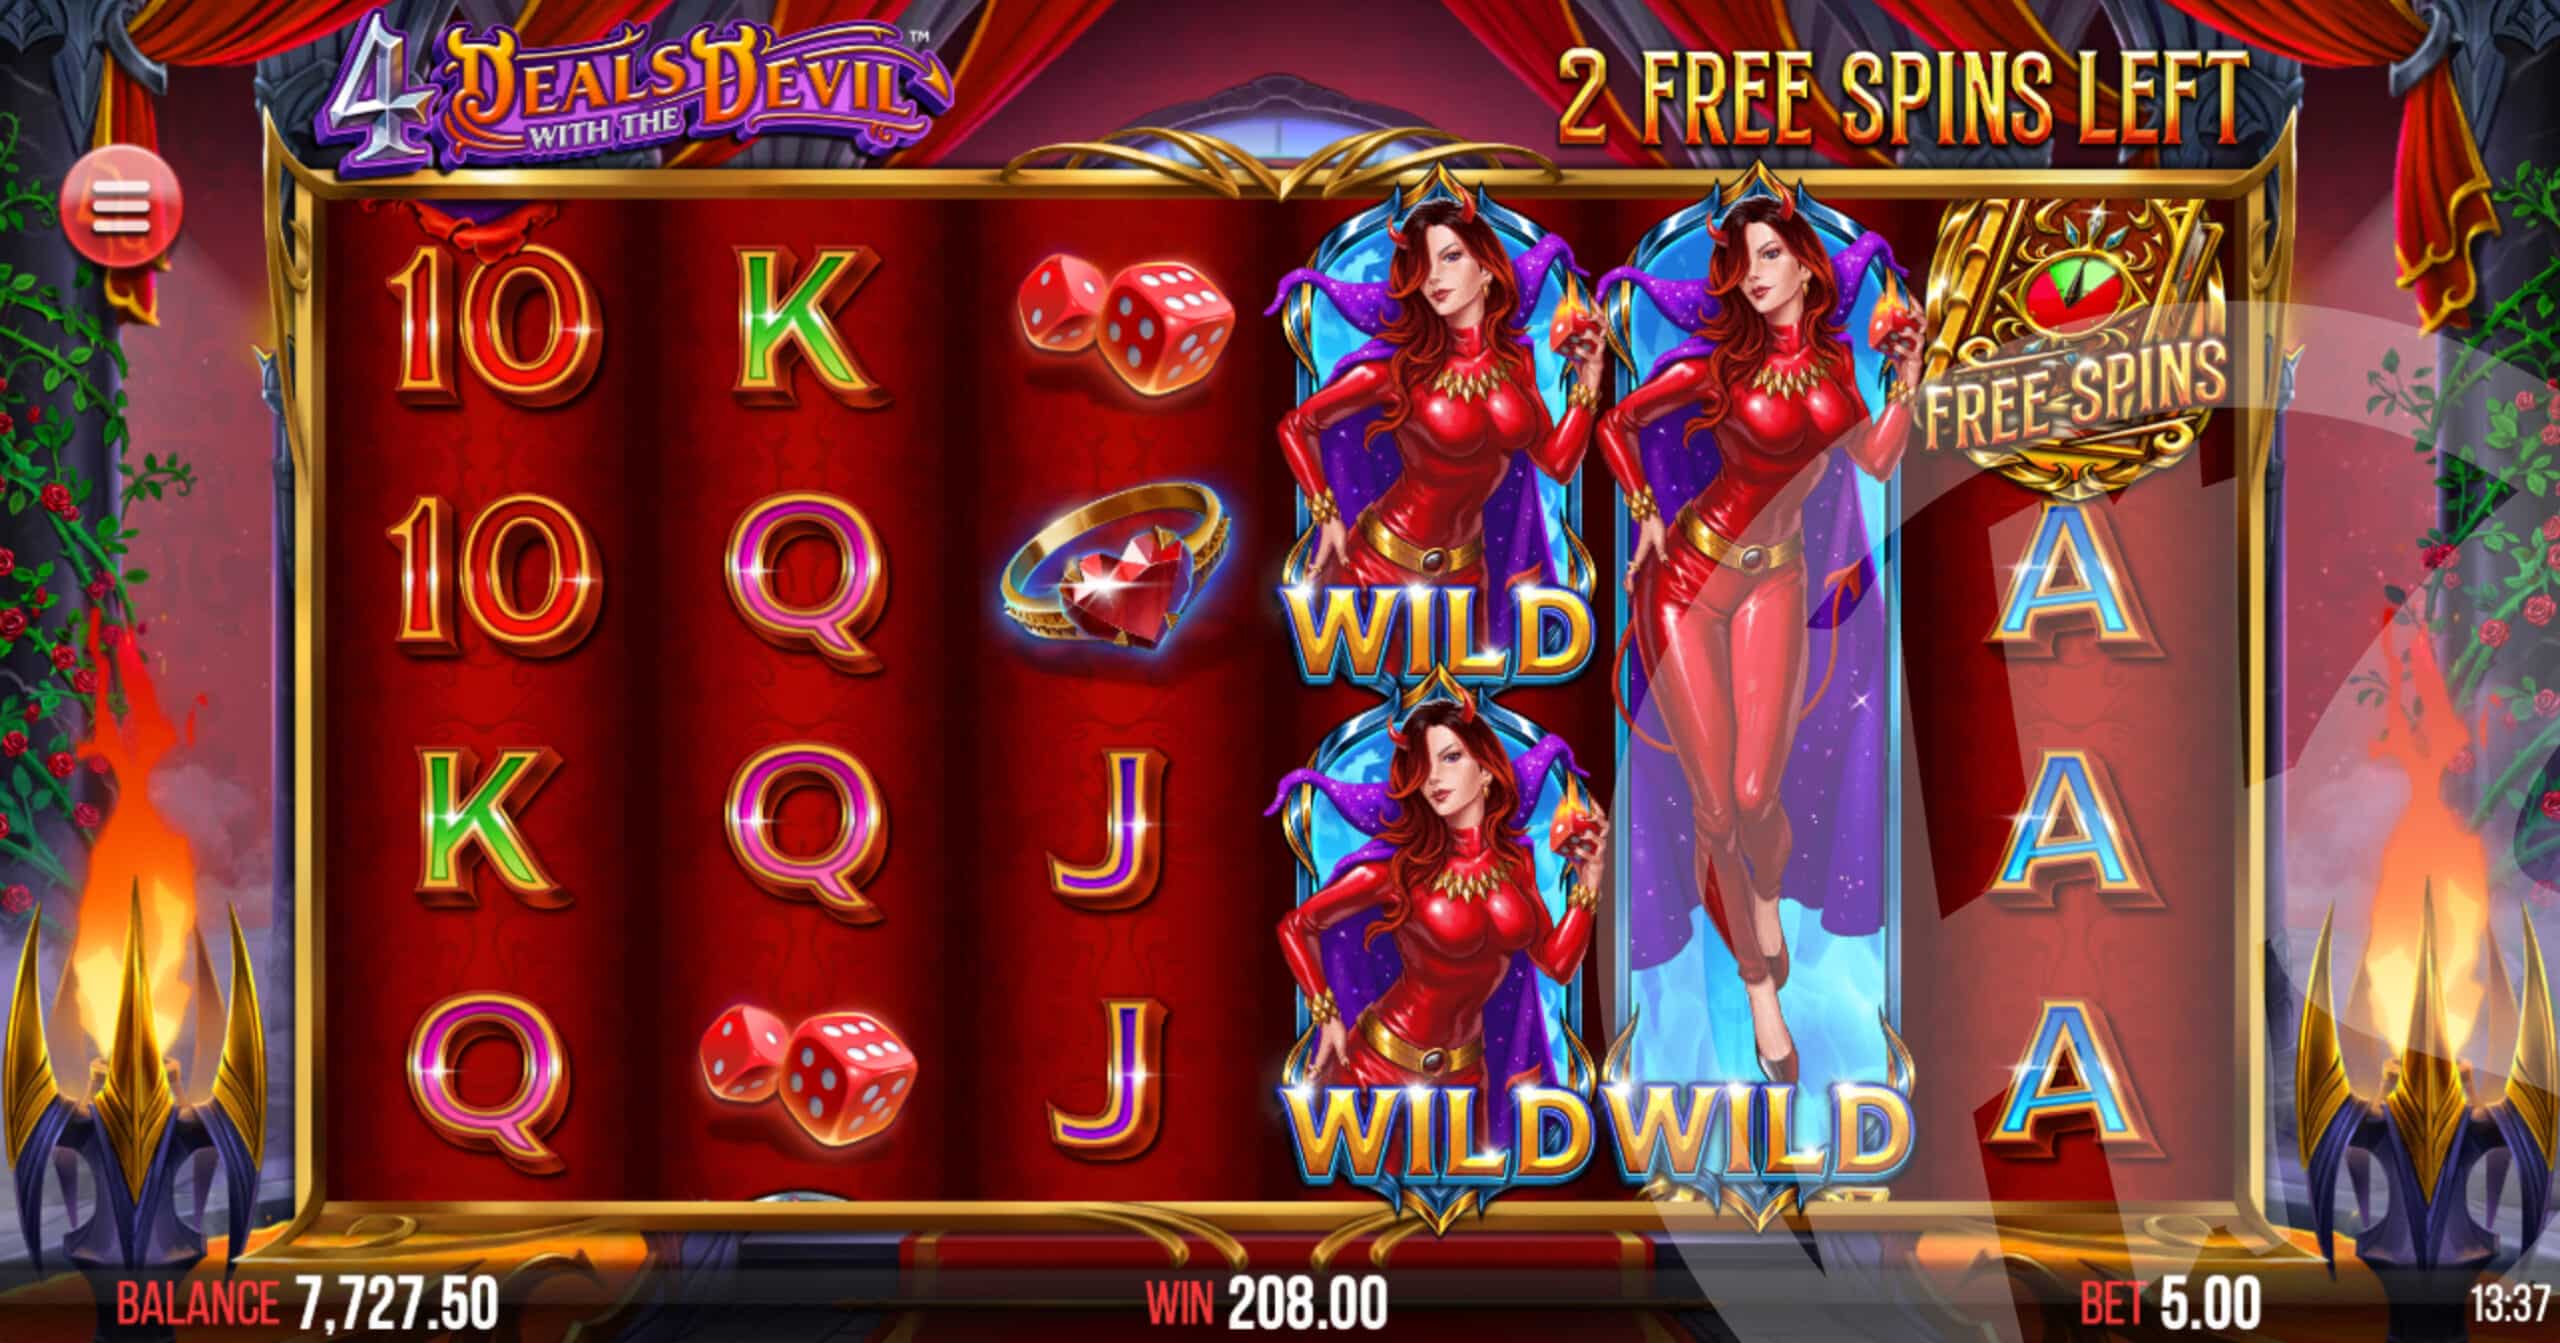 4 Deals With The Devil Hot Free Spins